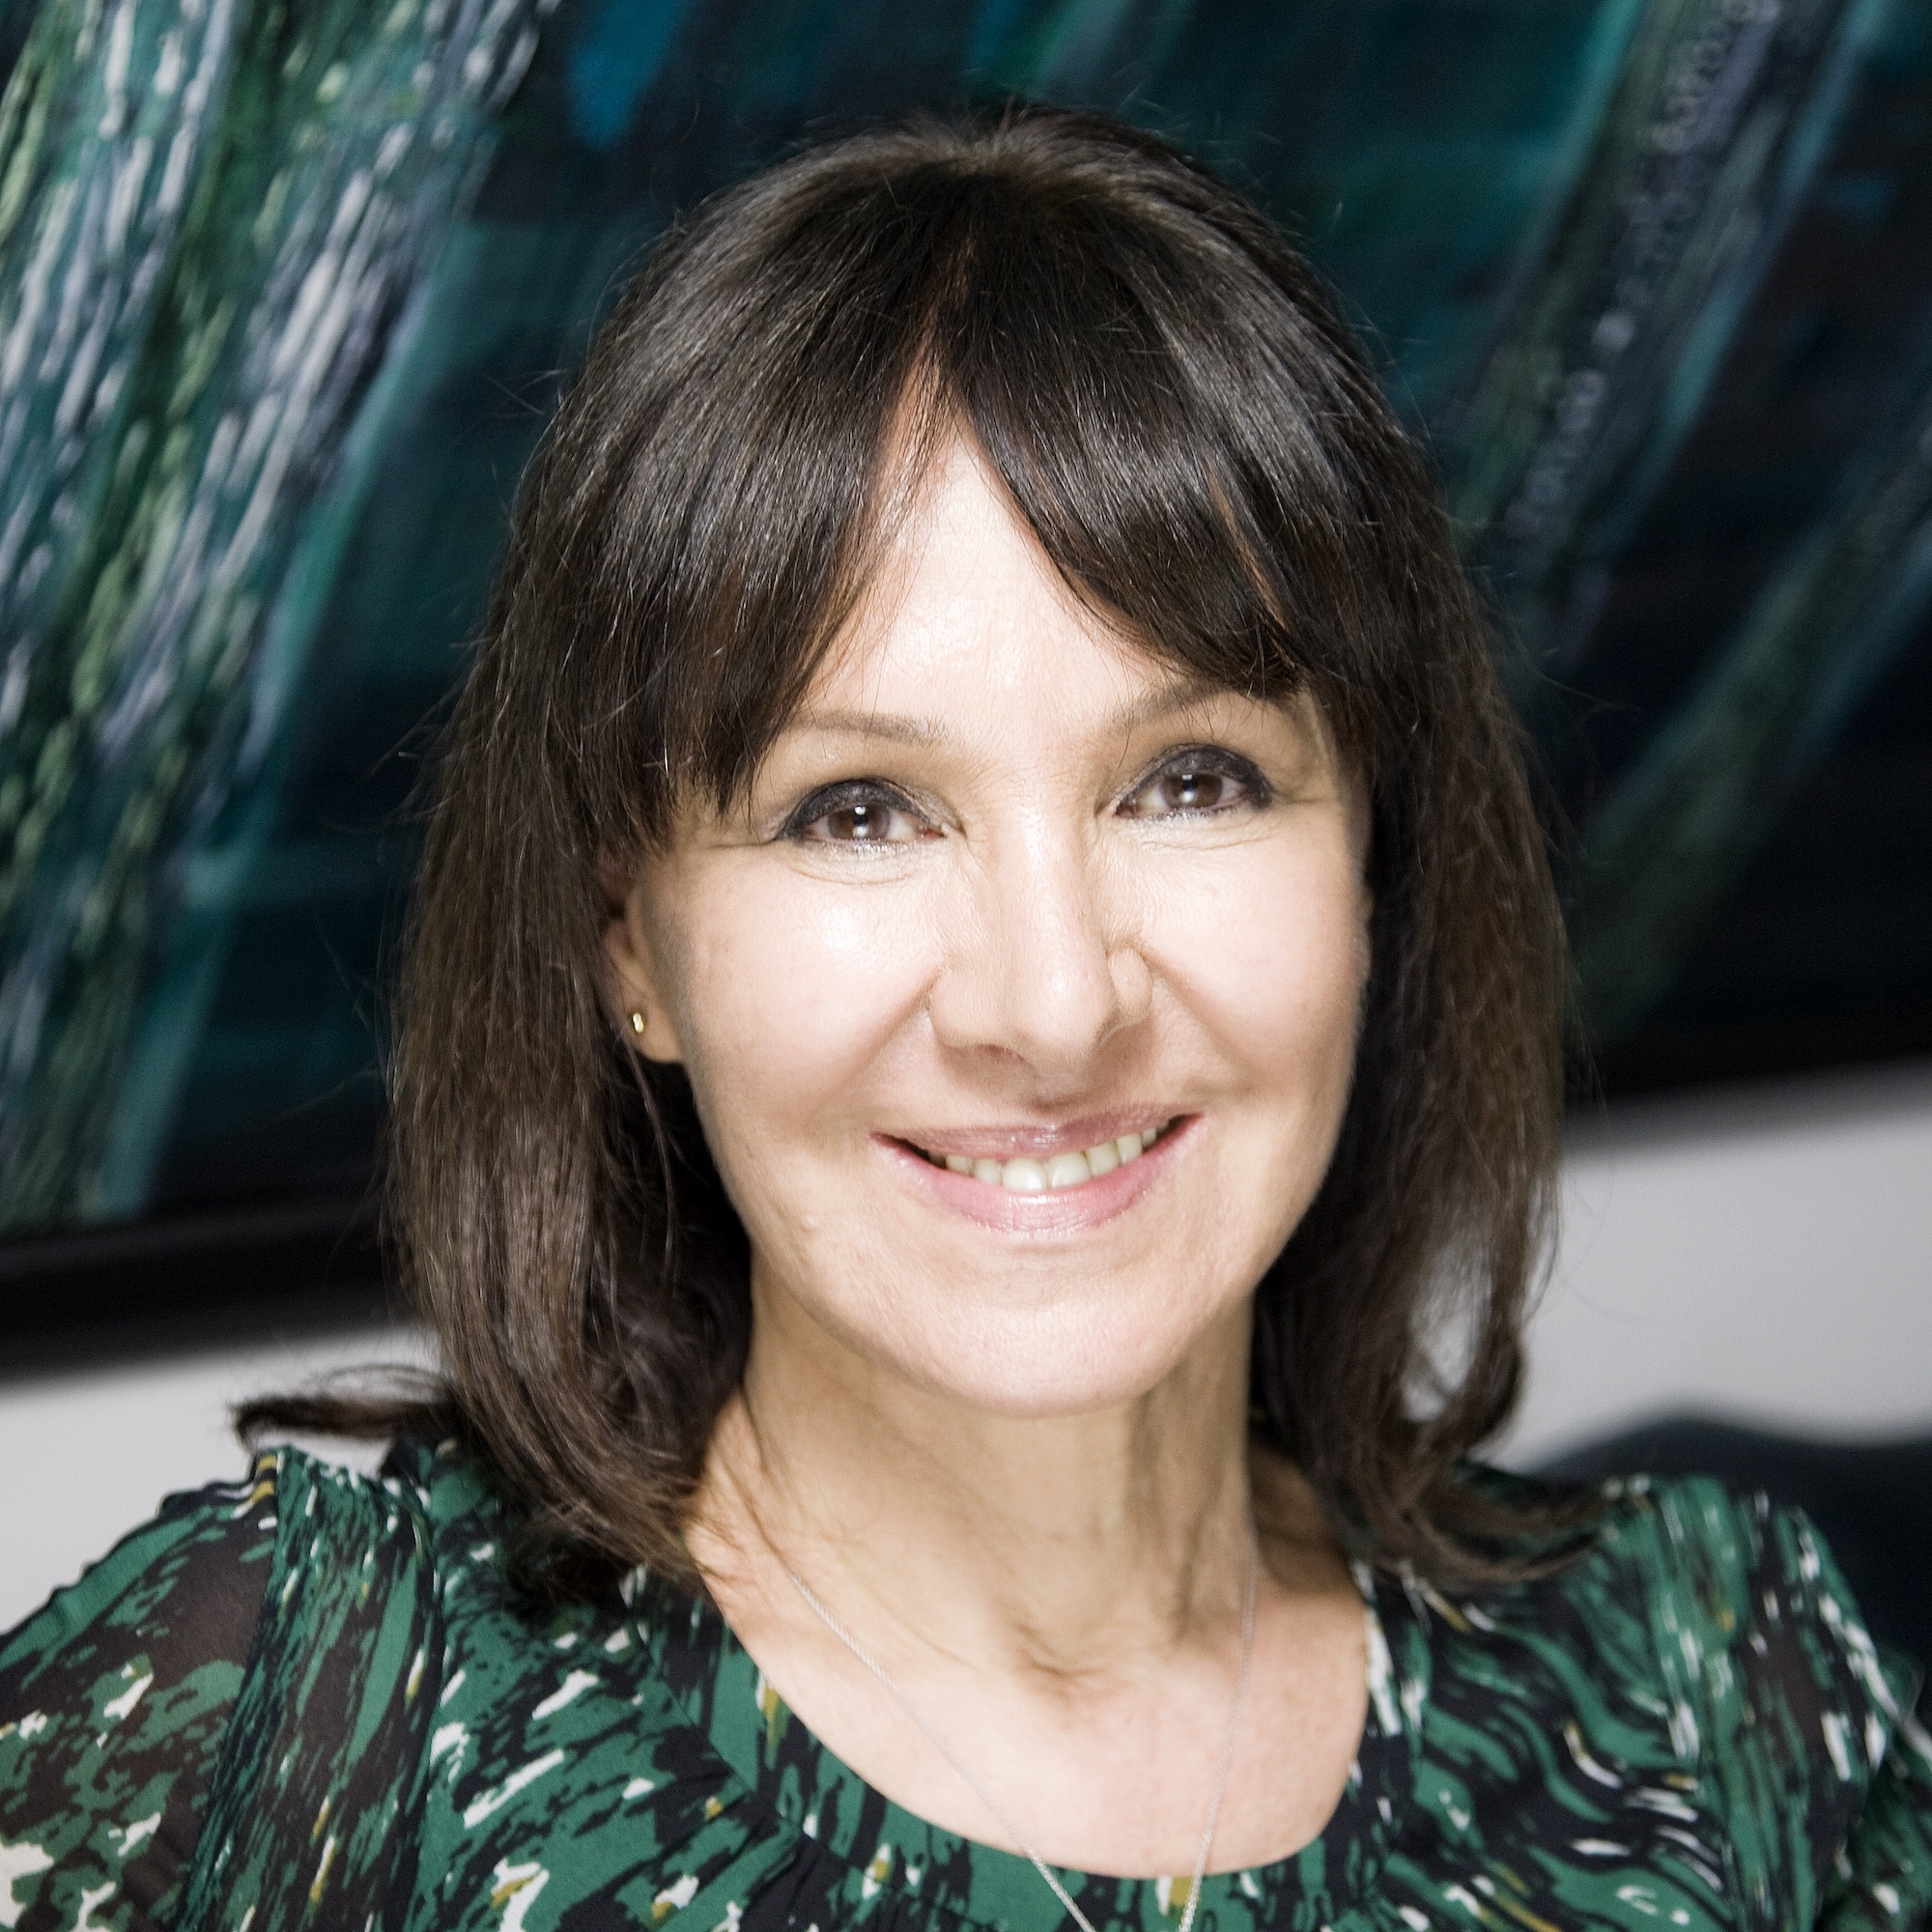 NEWS | 2Faced Dance Company has announced Arlene Phillips CBE as a new Patron for the organisation